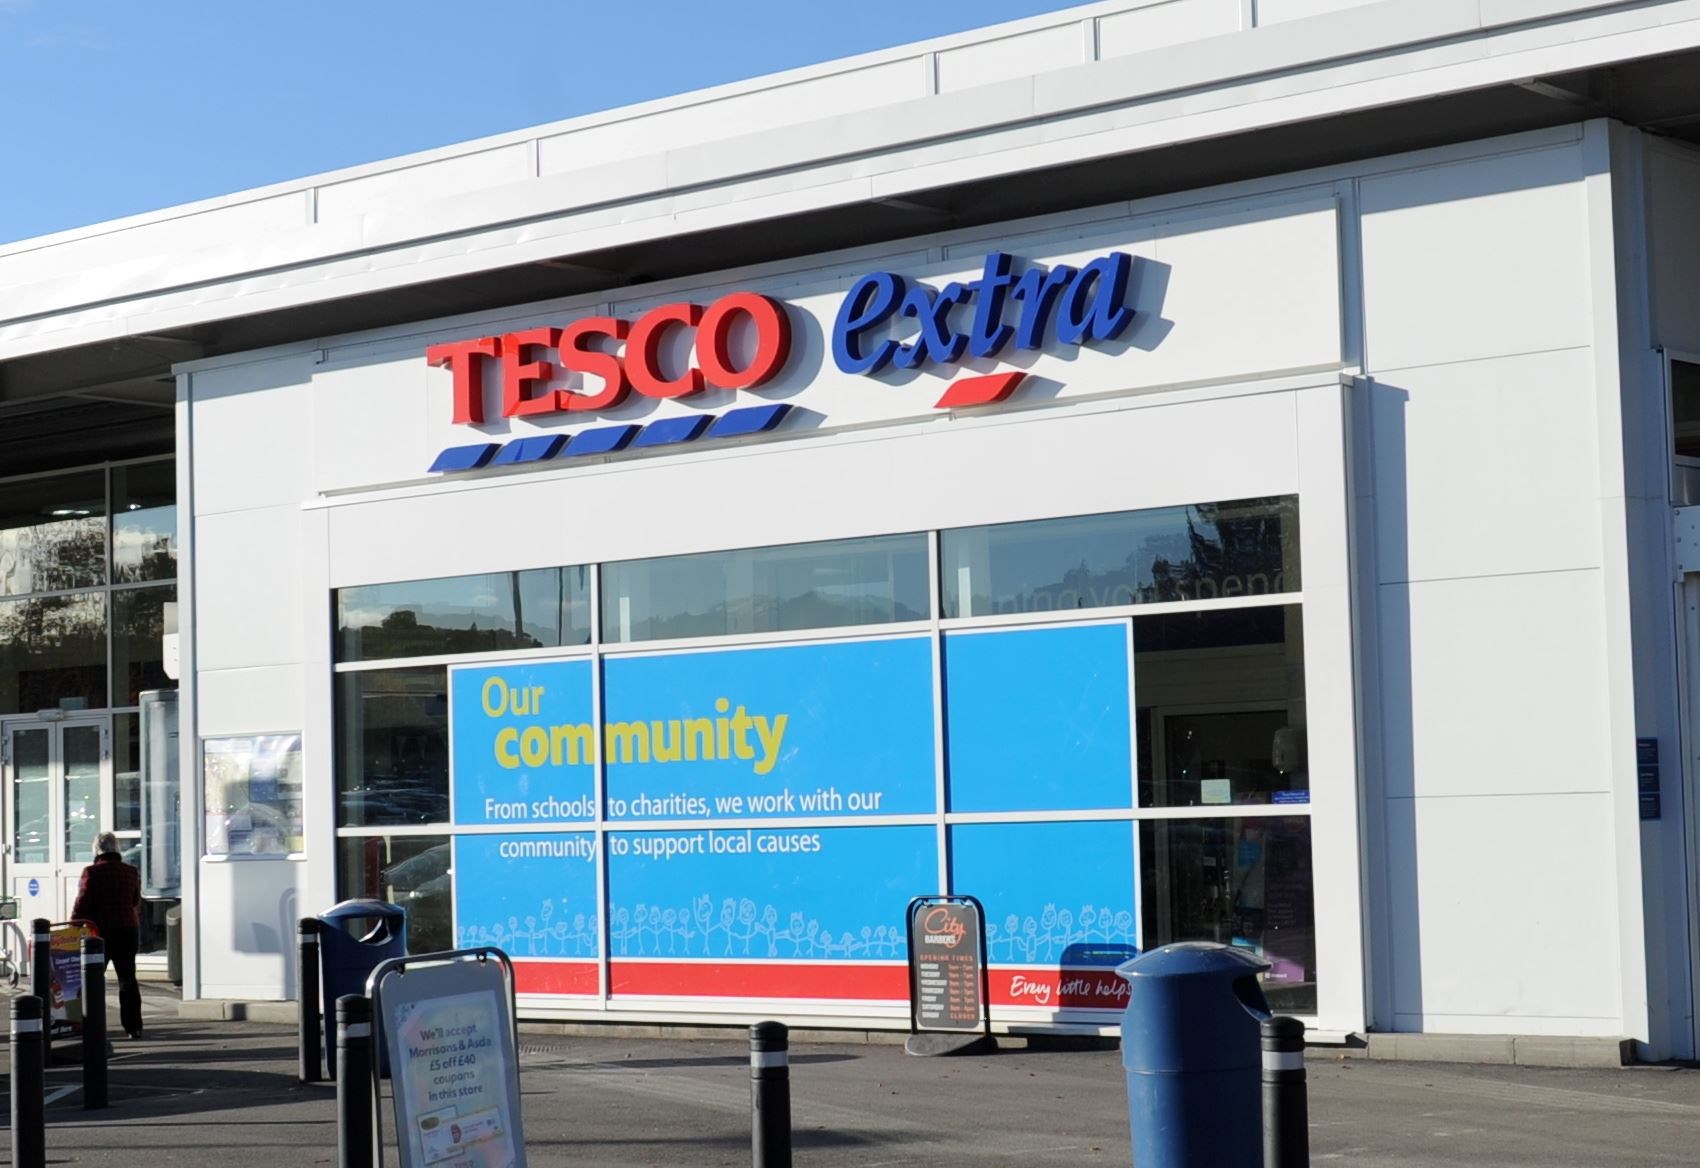 Staff member at Inverness Tesco store tests positive for coronavirus